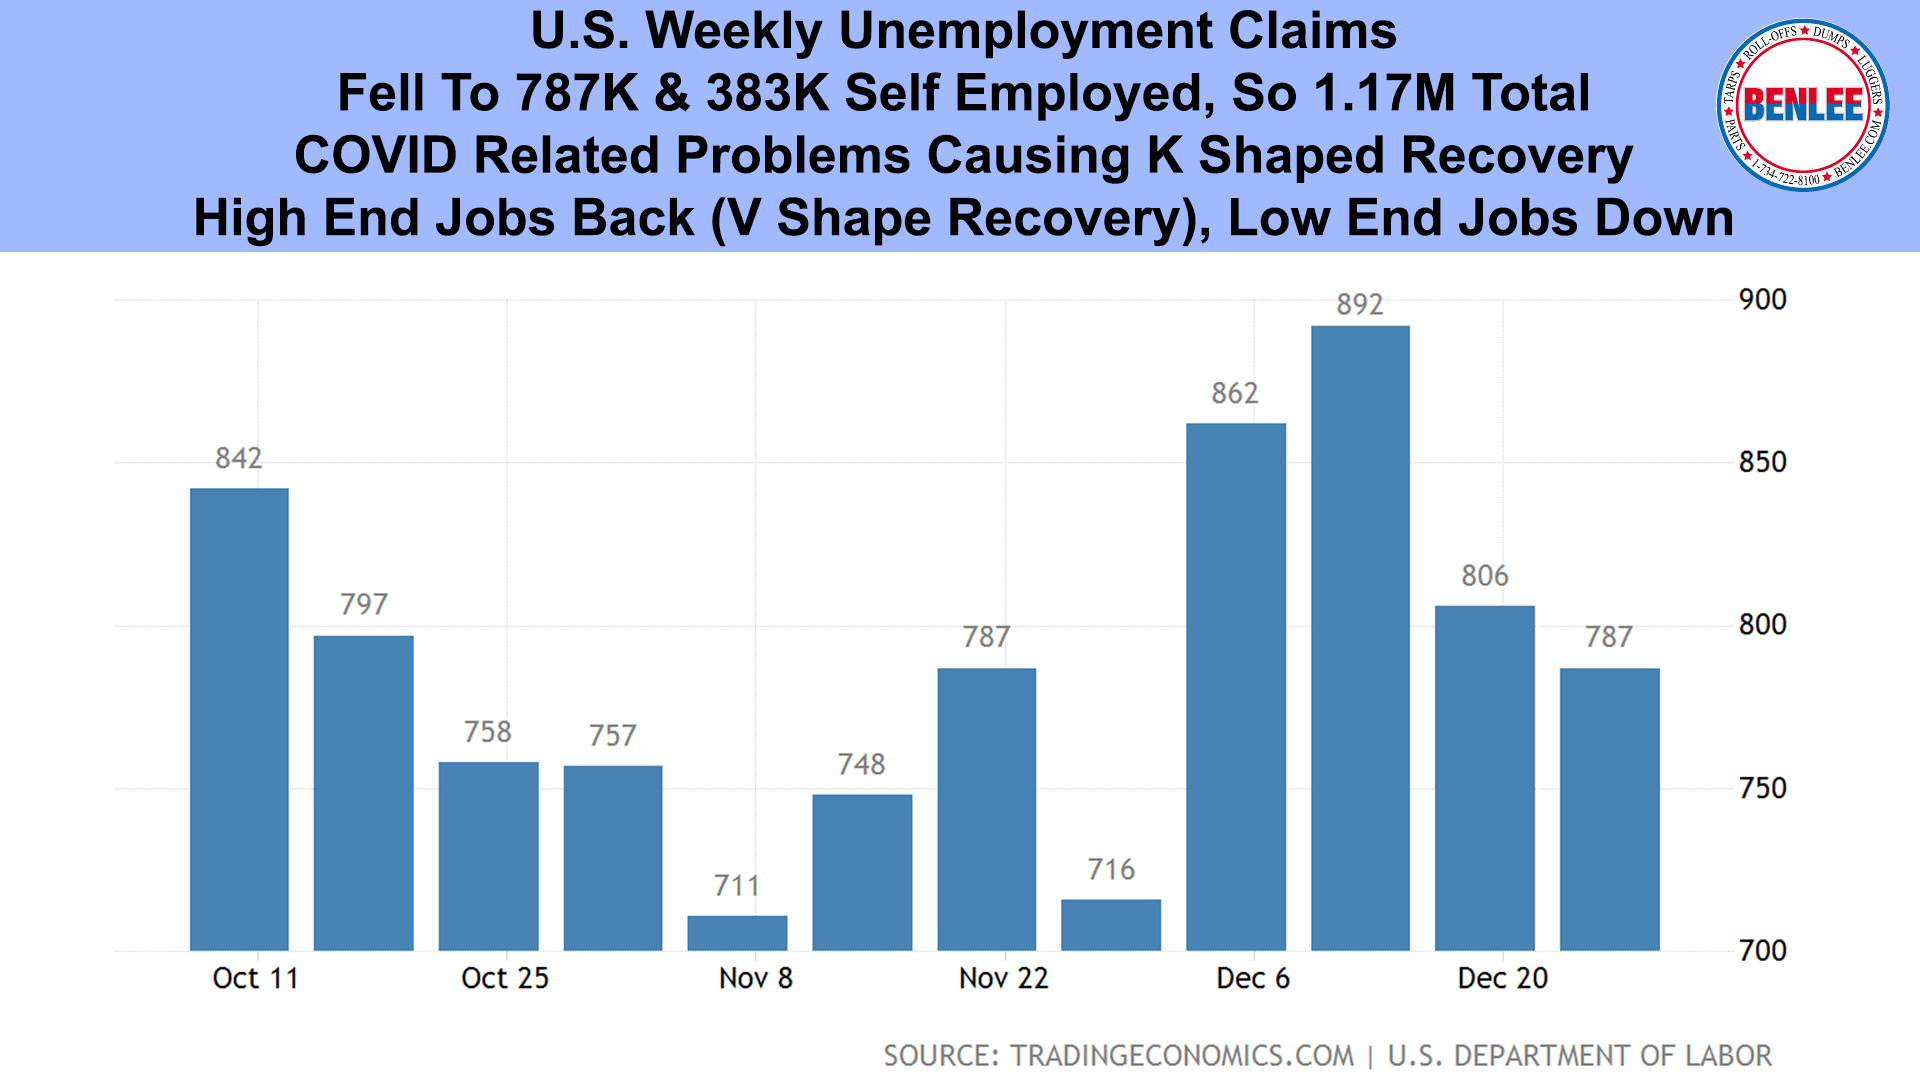 U.S. Weekly Unemployment Claims